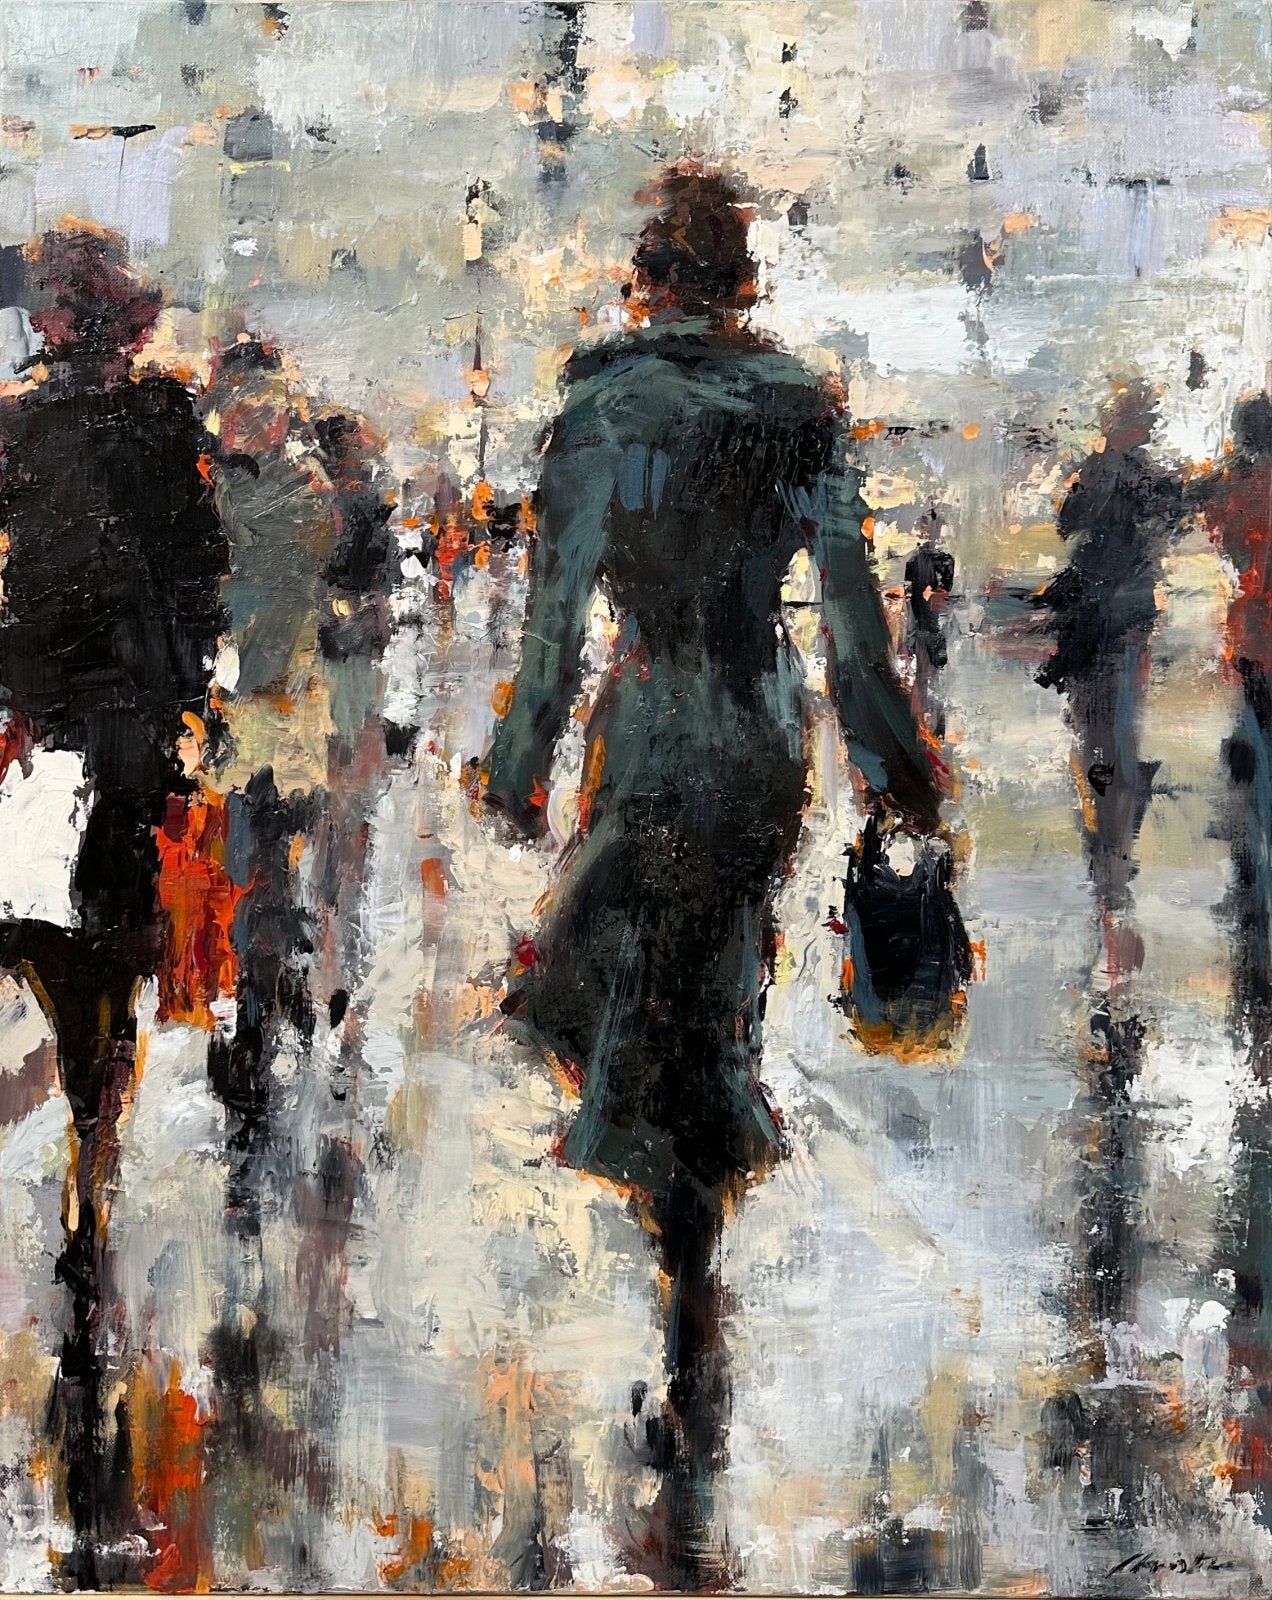 City Stride by Lorraine Christie at LePrince Galleries